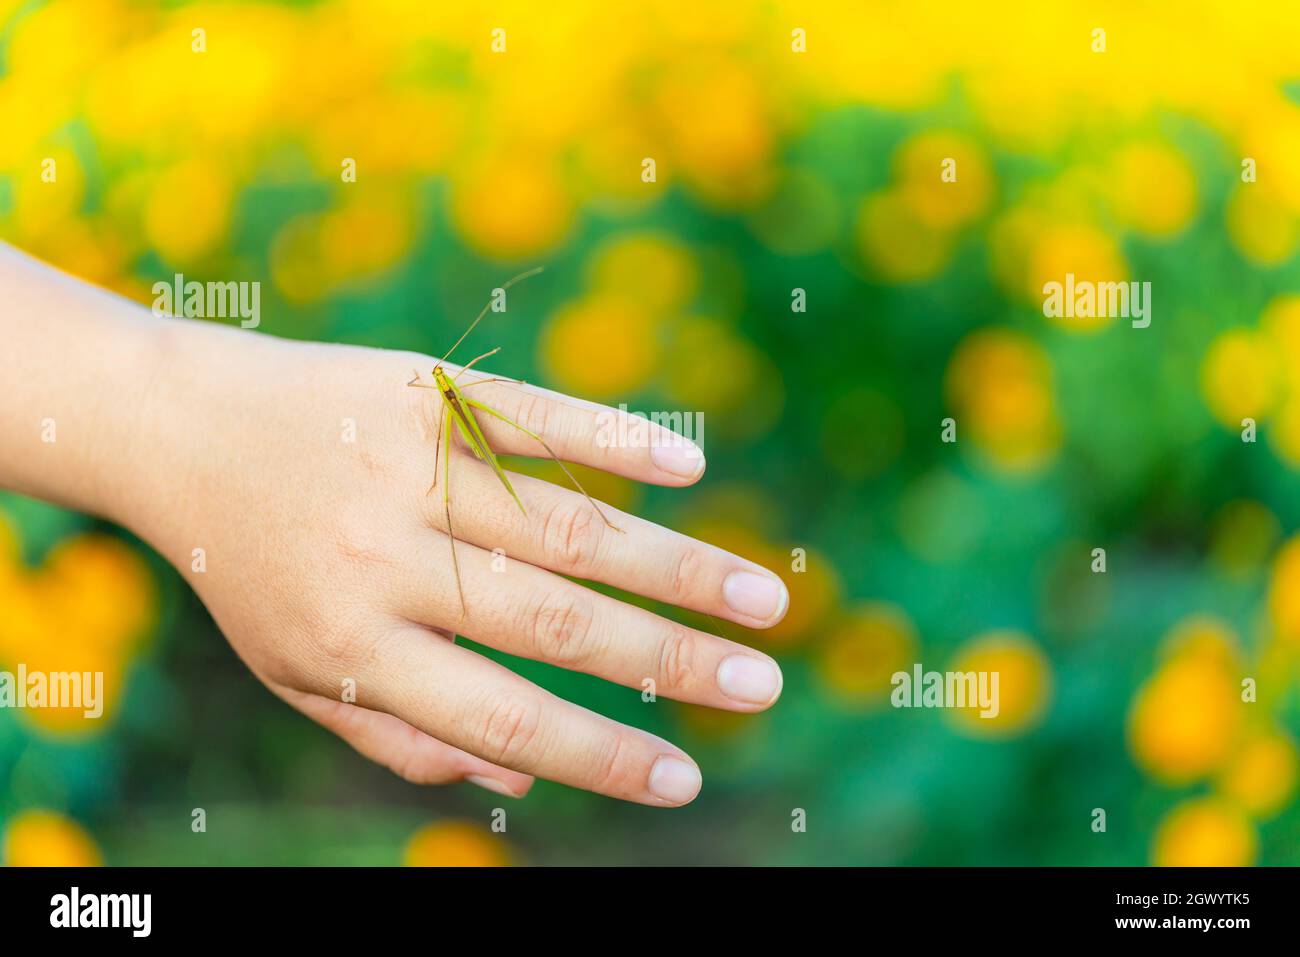 Close-up Of Insect On Hand Over Marigold Field Stock Photo